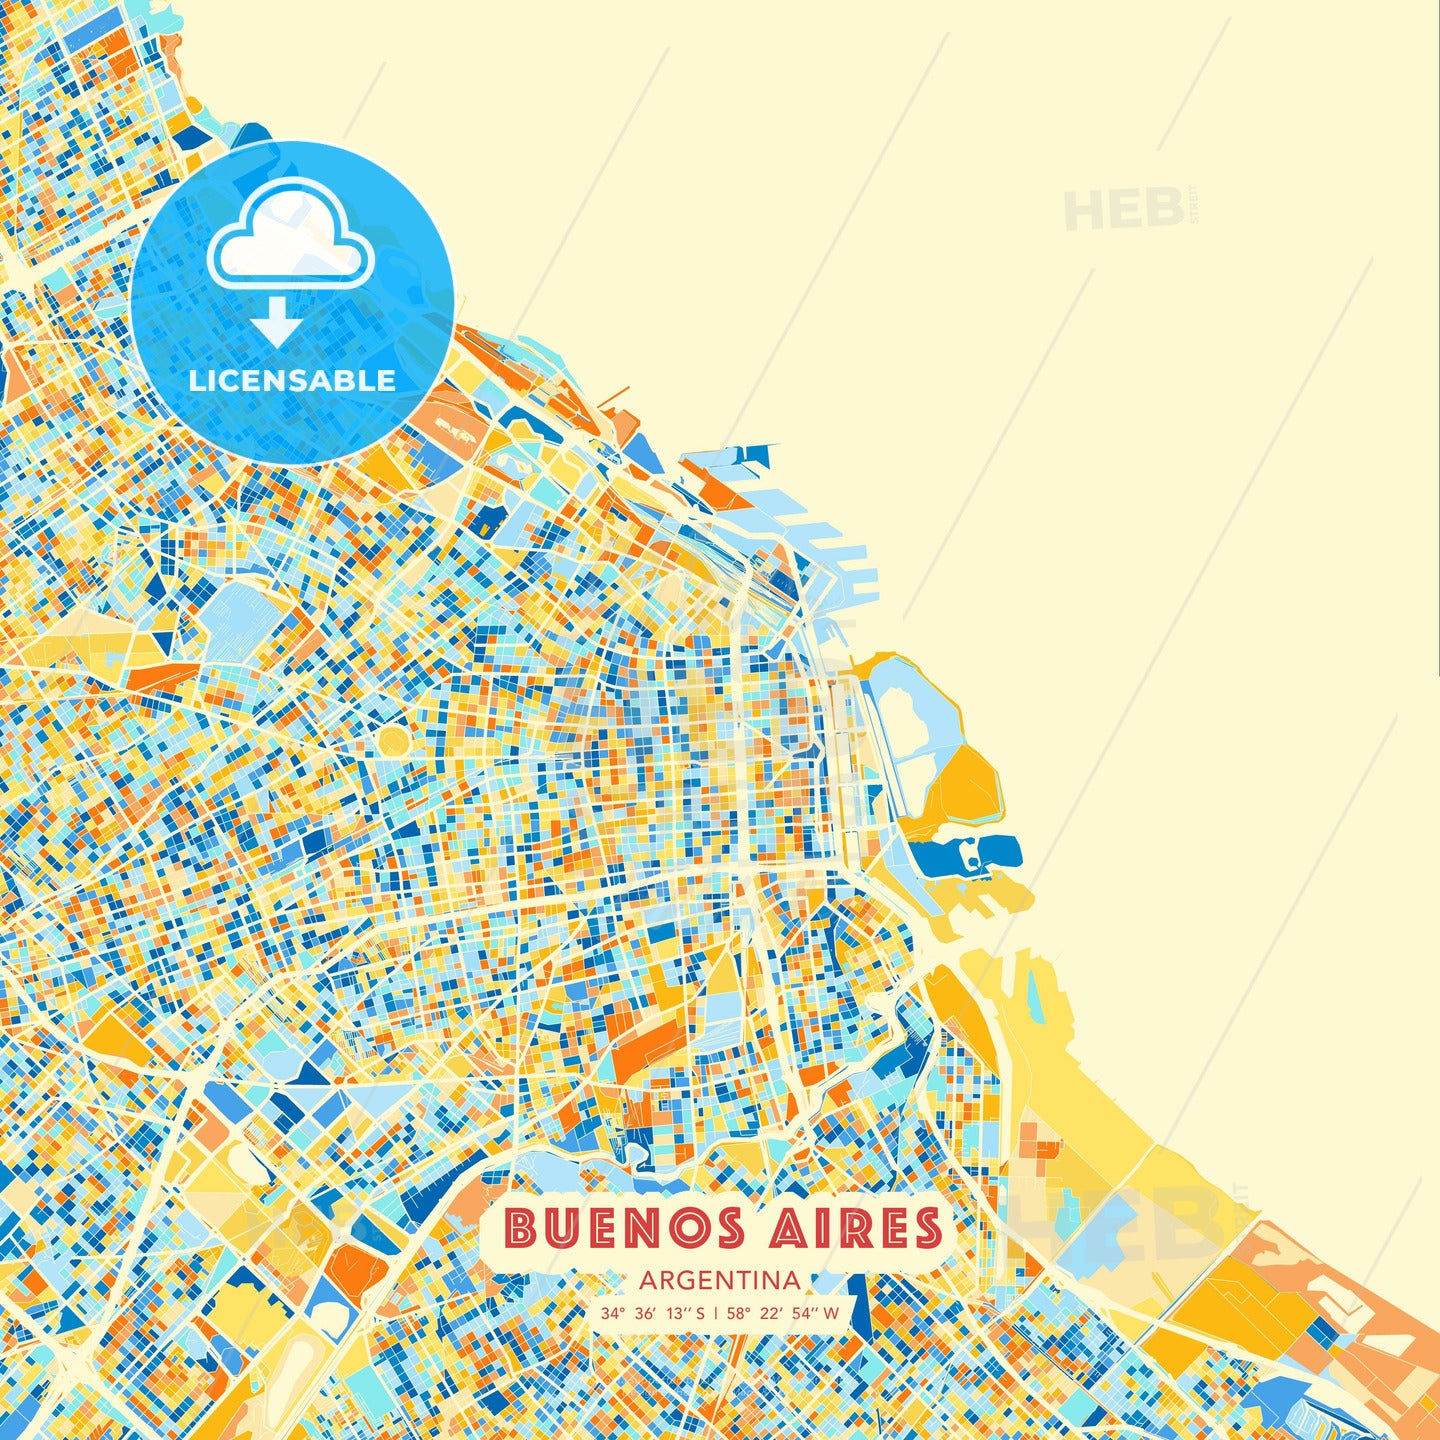 Buenos Aires, Argentina, map - HEBSTREITS Sketches